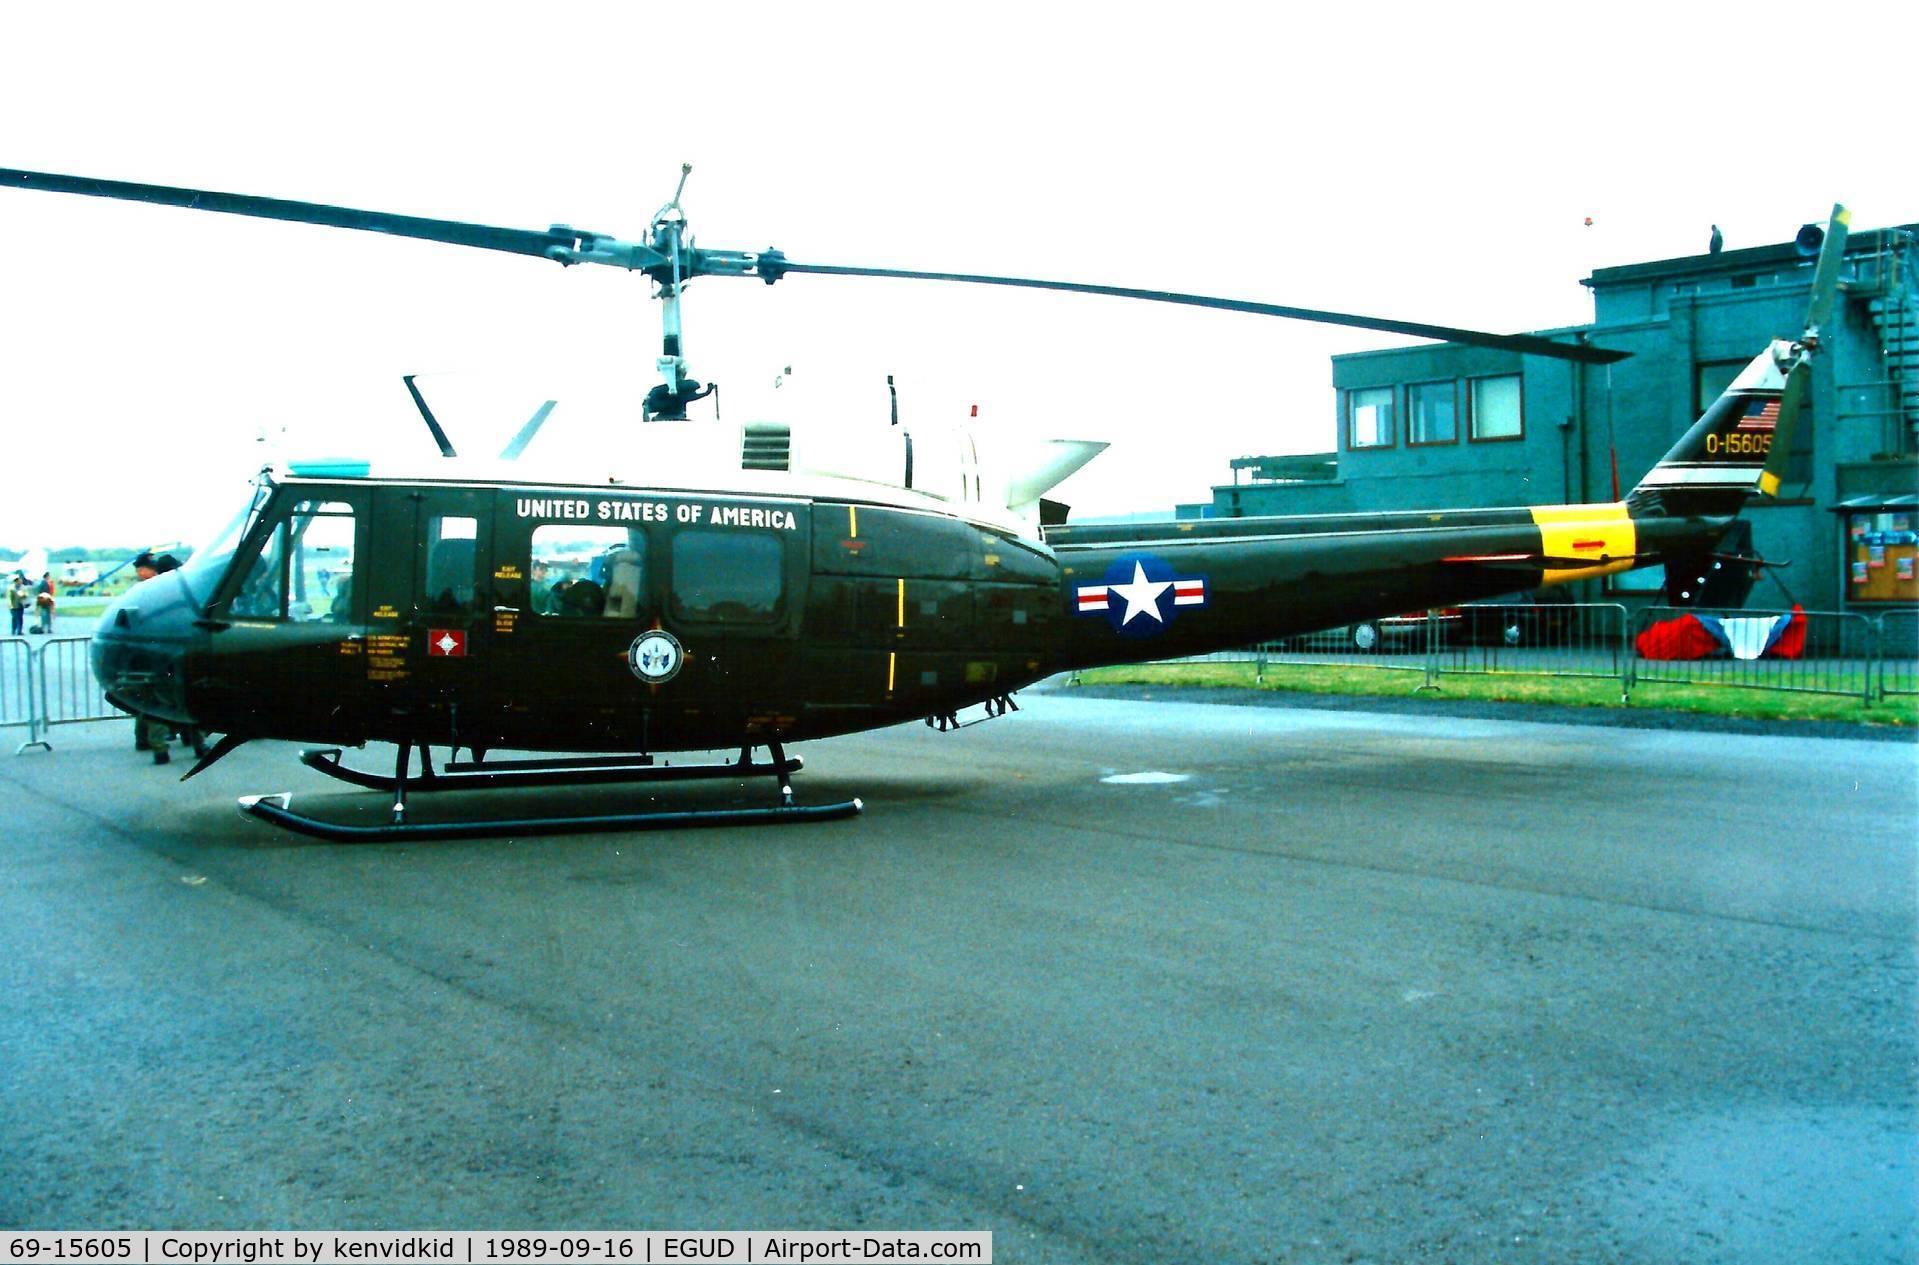 69-15605, 1969 Bell UH-1H Iroquois C/N 11893, At the 1989 Abingdon air show.